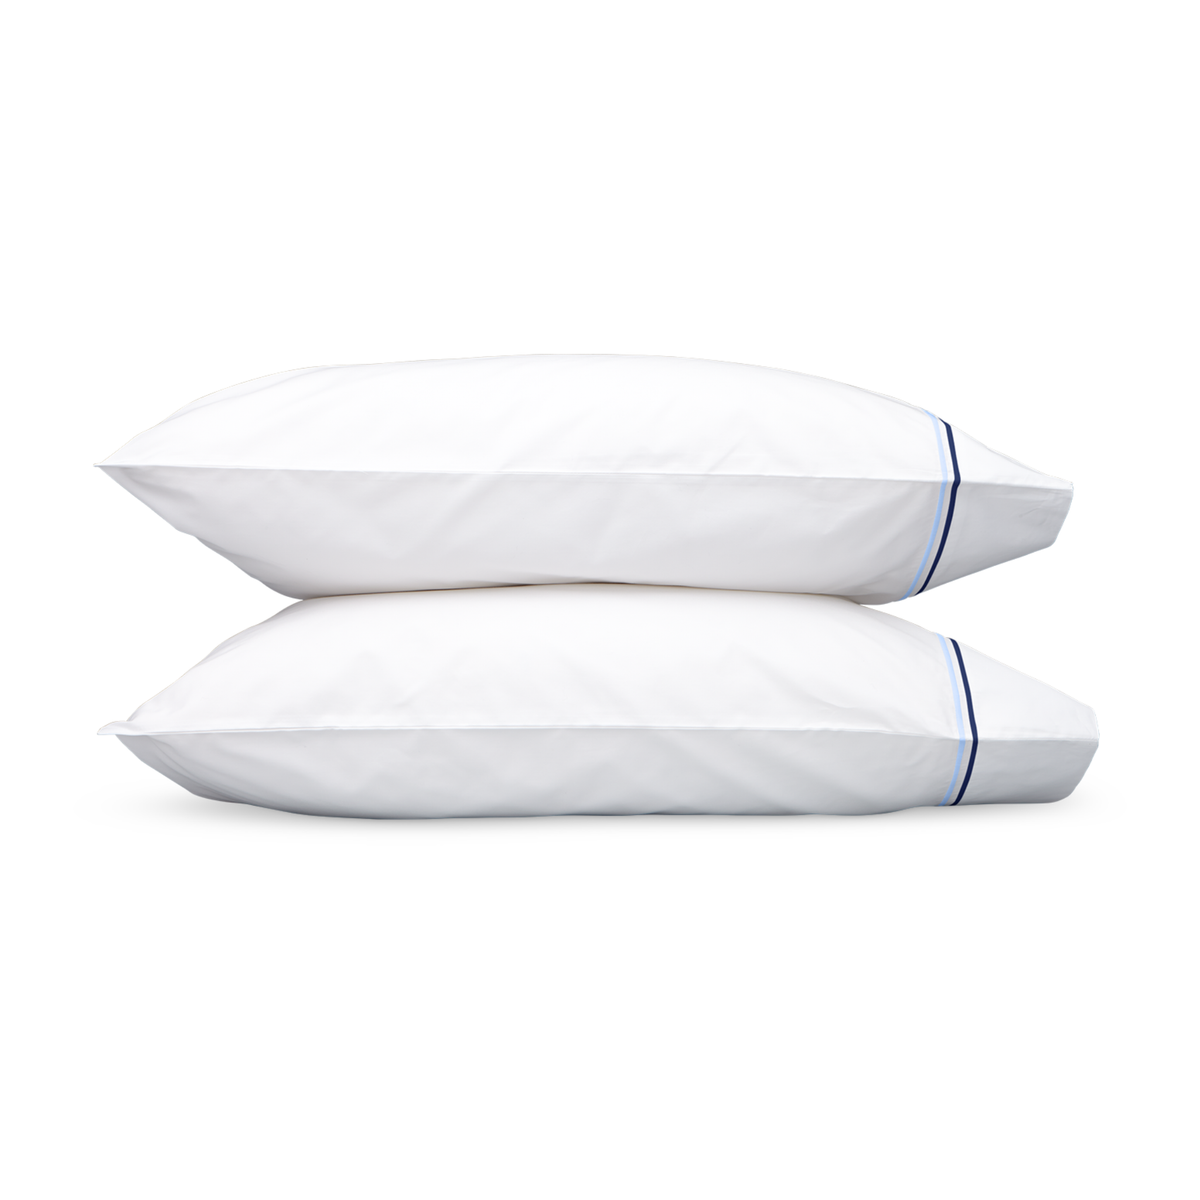 Pair of Pillowcases of Matouk Essex Bedding Collection in Navy Color